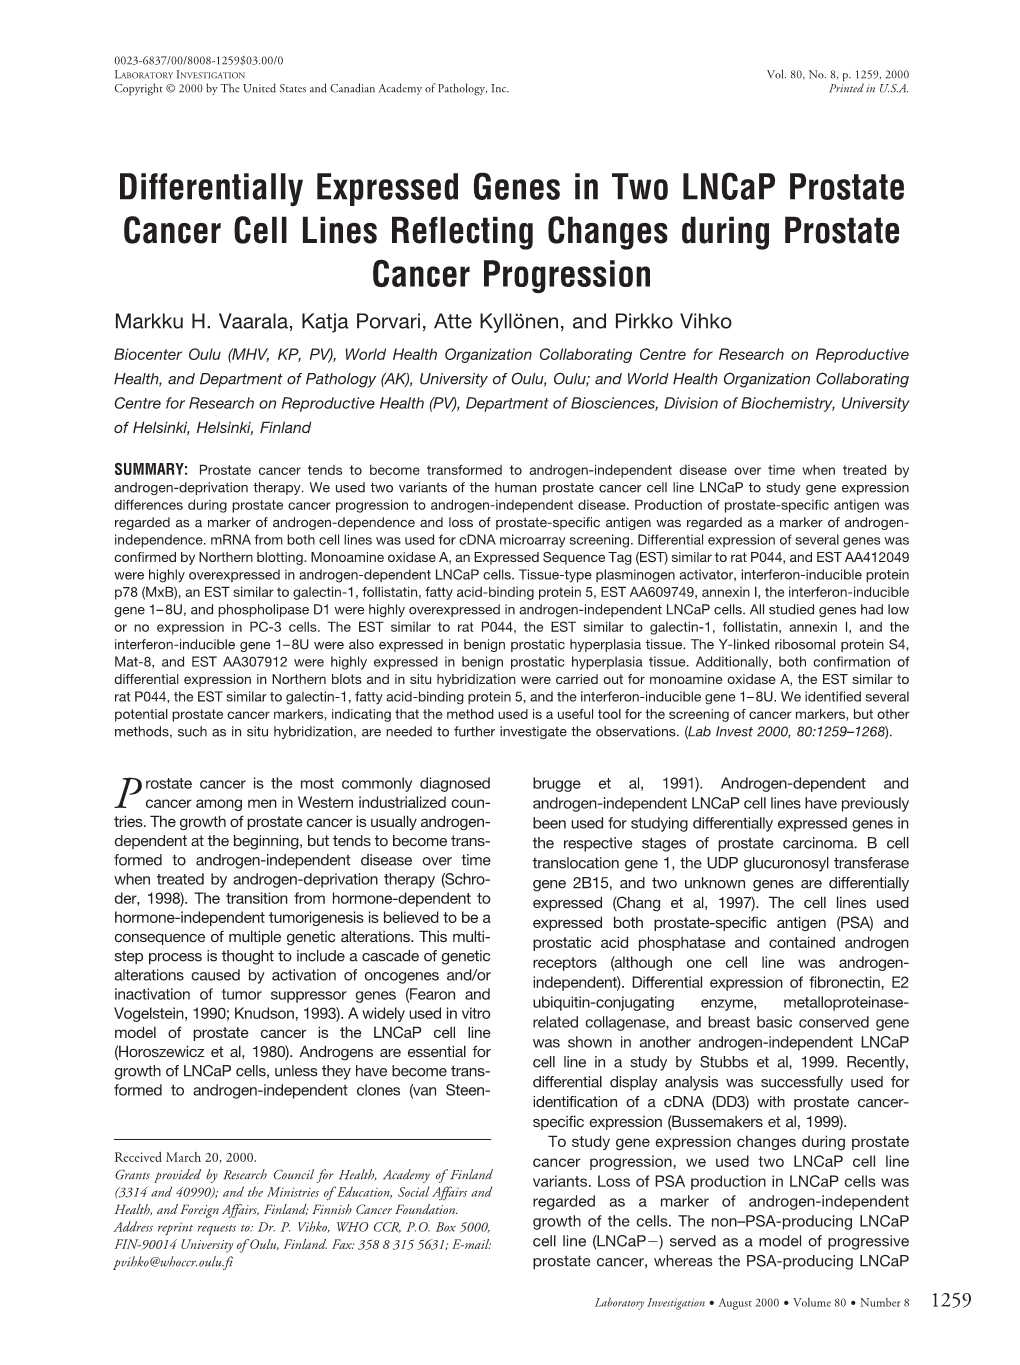 Differentially Expressed Genes in Two Lncap Prostate Cancer Cell Lines Reflecting Changes During Prostate Cancer Progression Markku H